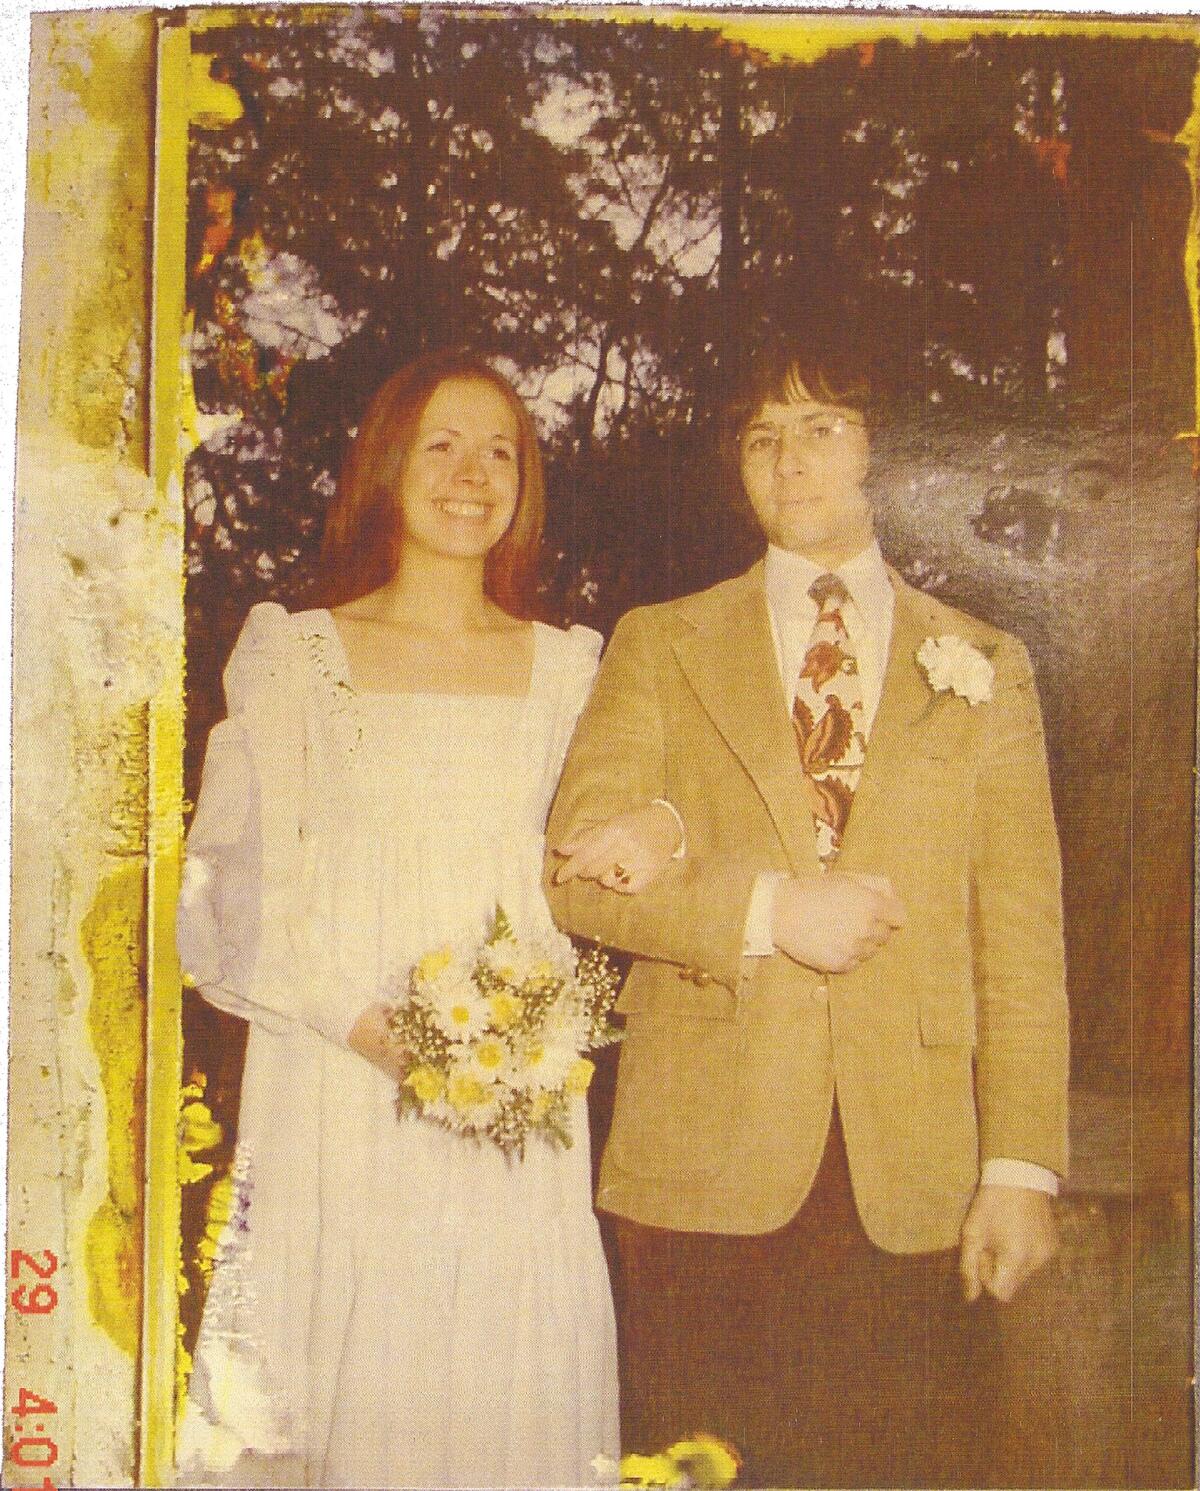 Kathleen Durst, wearing a wedding dress and holding flowers, stands next to Robert Durst.